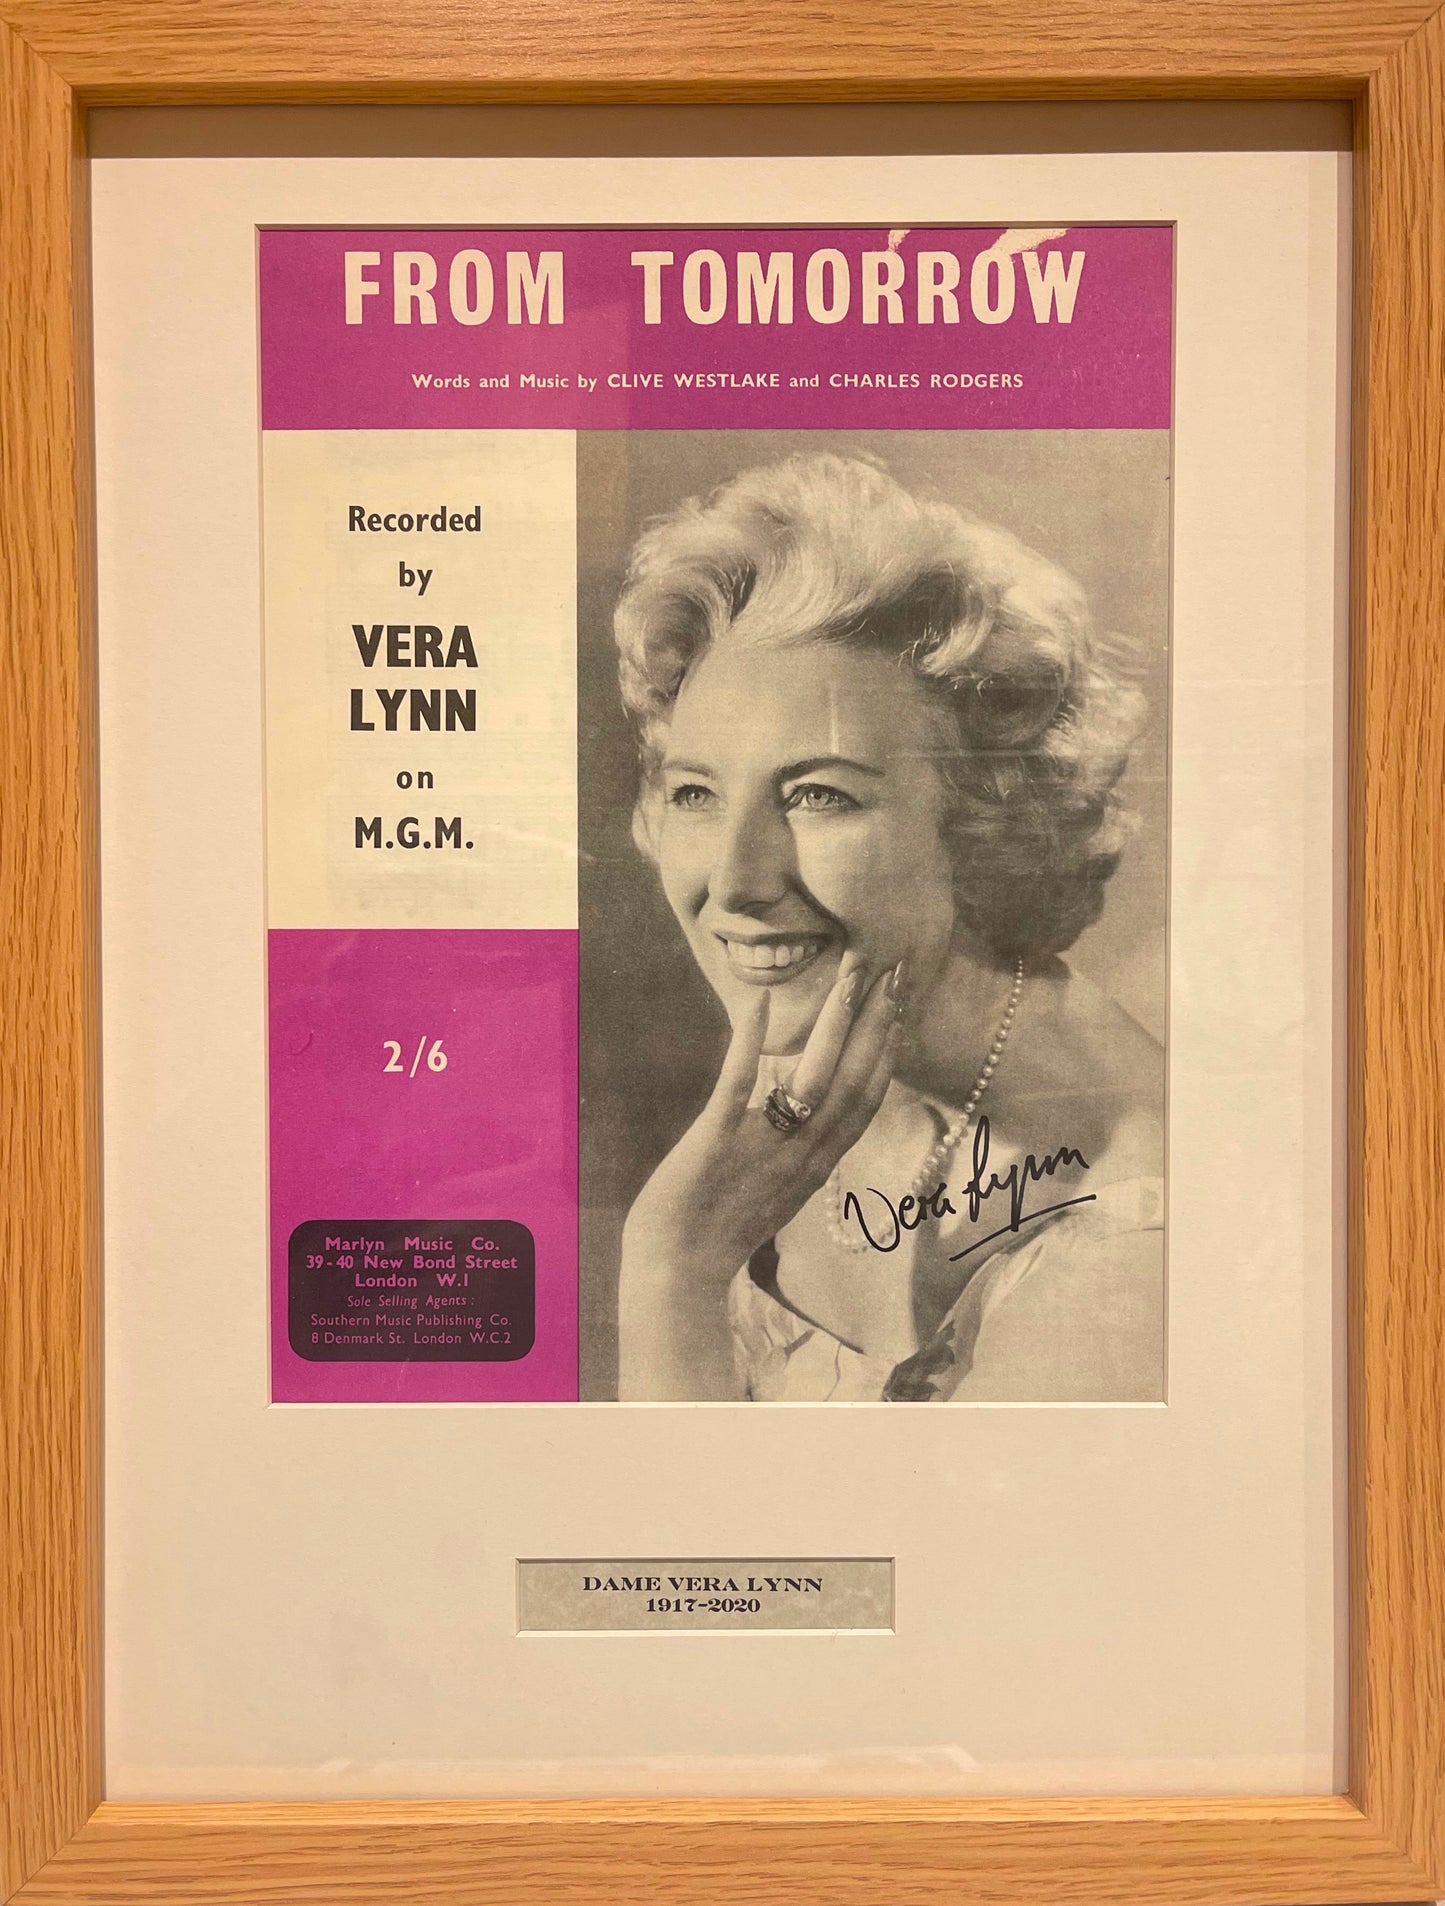 DAME VERA LYNN HAND SIGNED SONGSHEET WITH COA